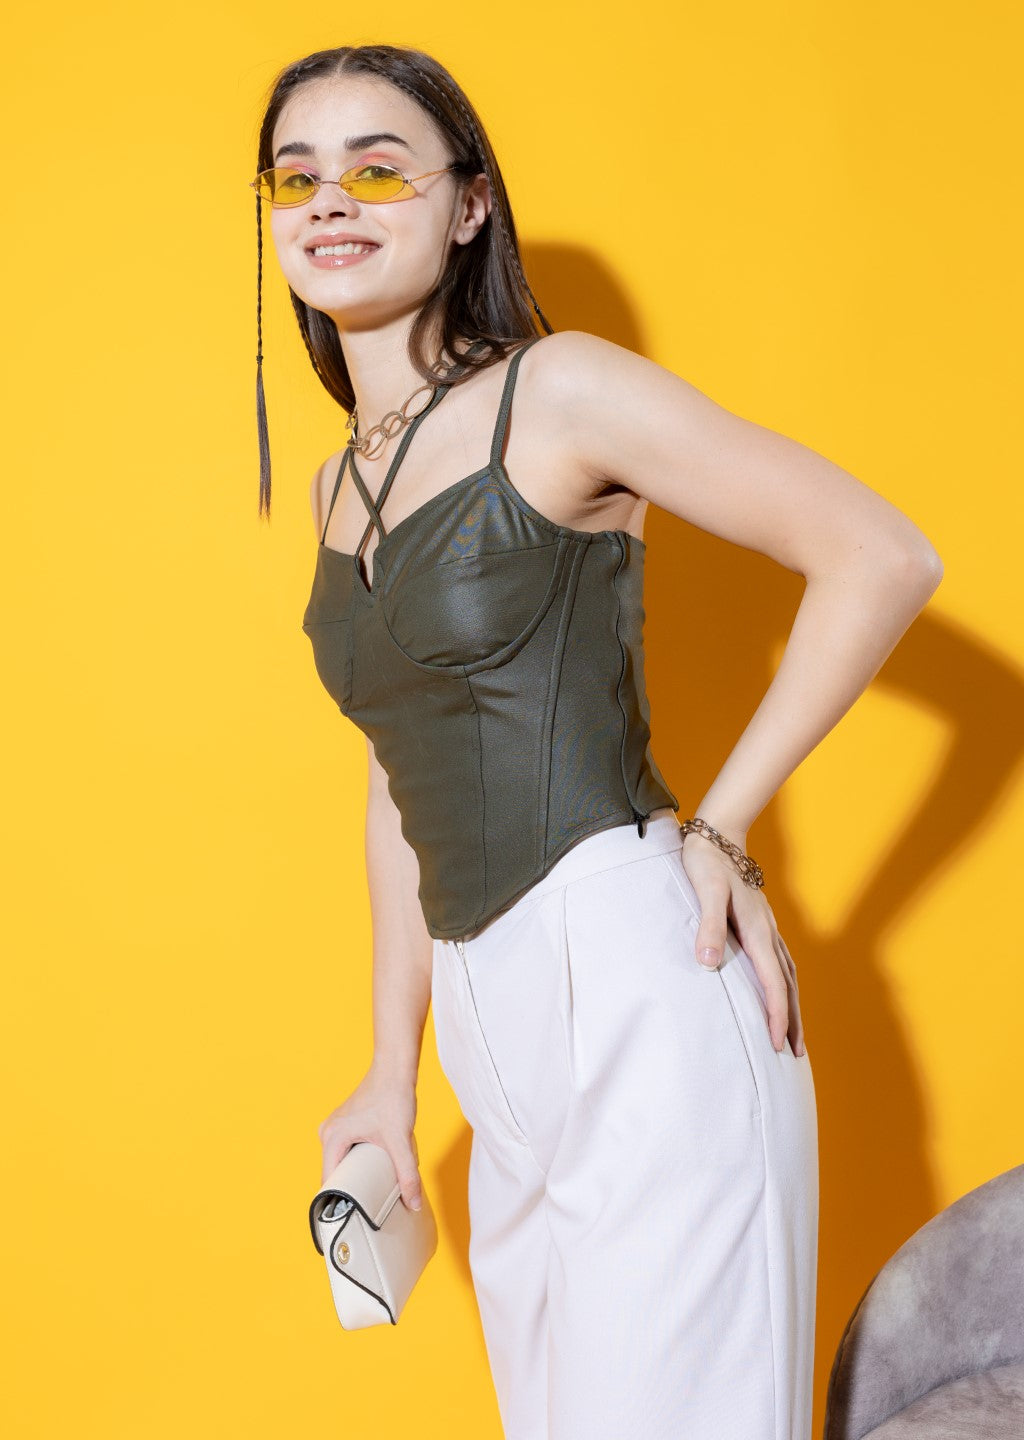 Soho Faux Leather Corset Top in Olive